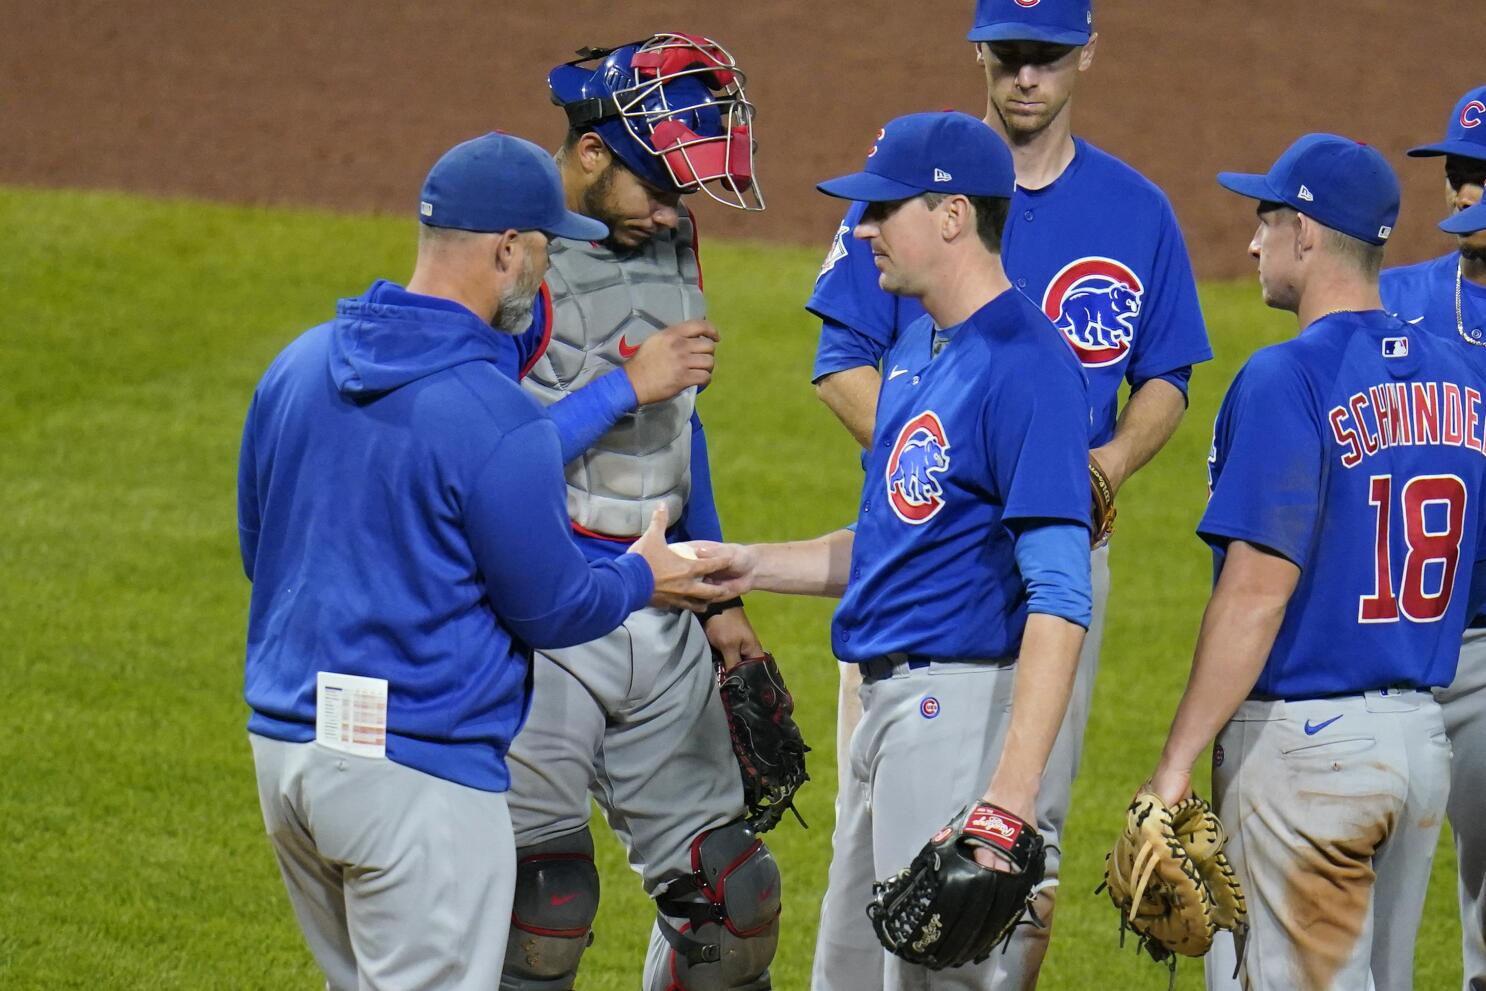 David Ross might shake up the Cubs coaching staff. Who should he